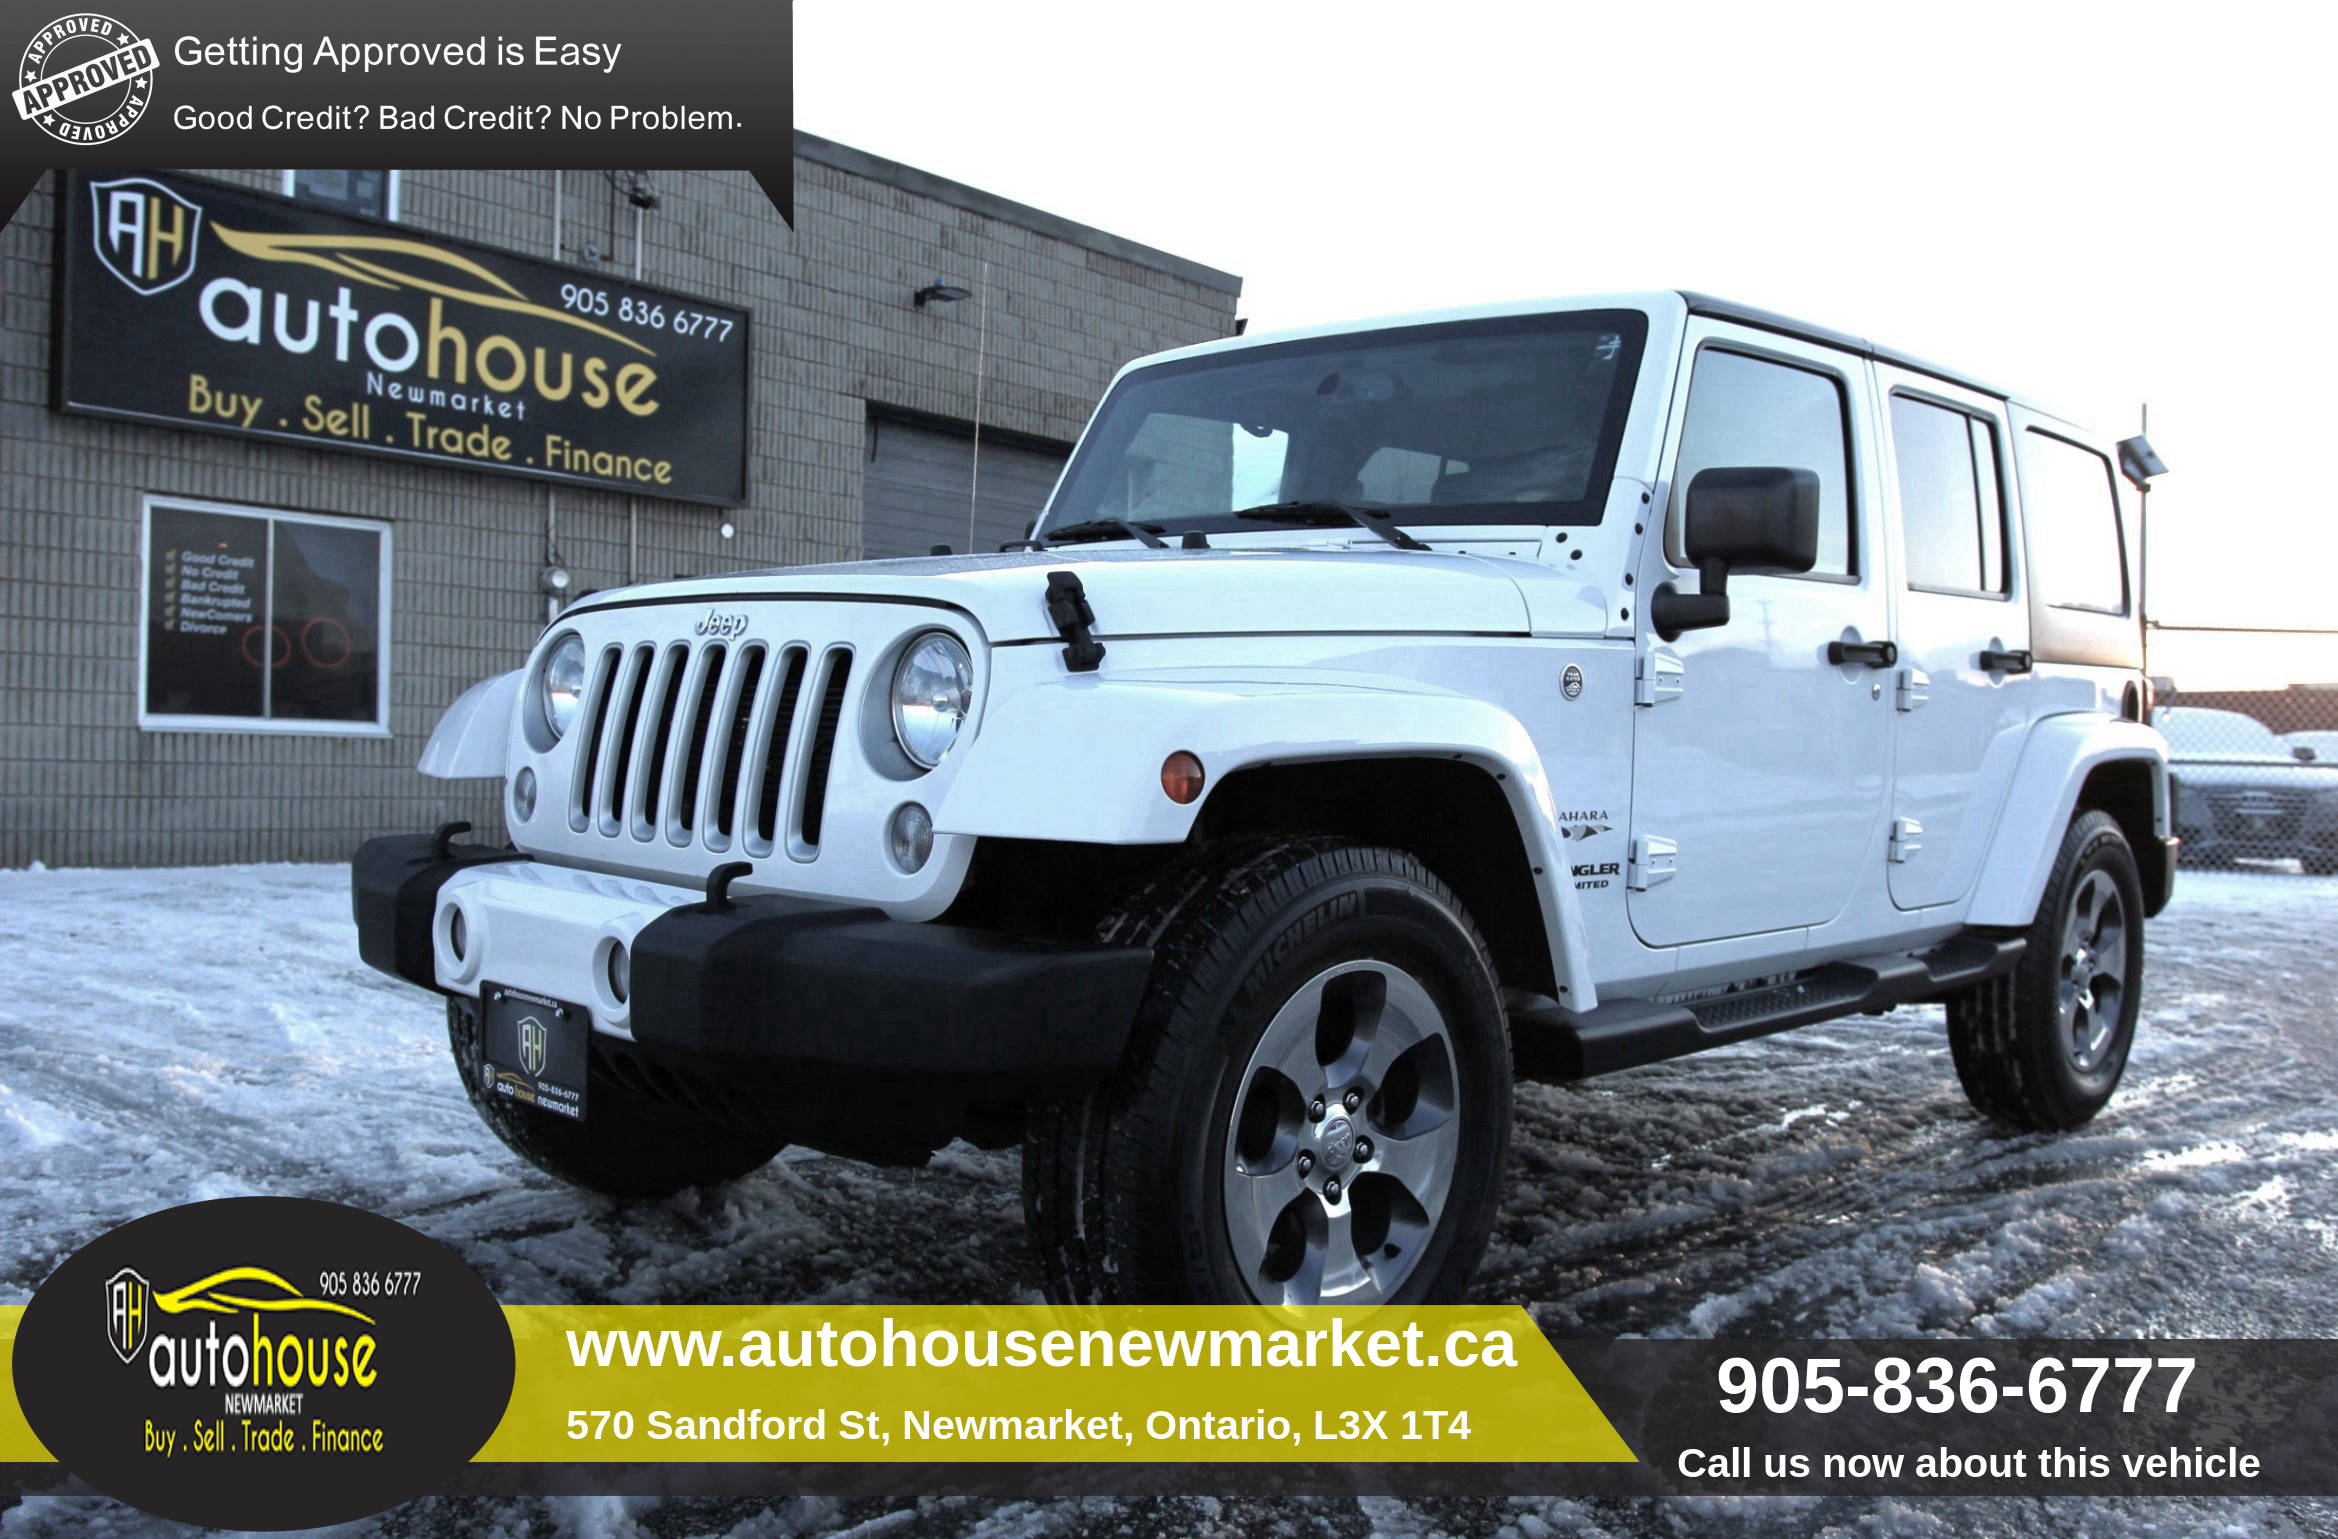 Used Cars Inventory Newmarket, Ontario | List of Used Vehicles at Autohouse  Newmarket